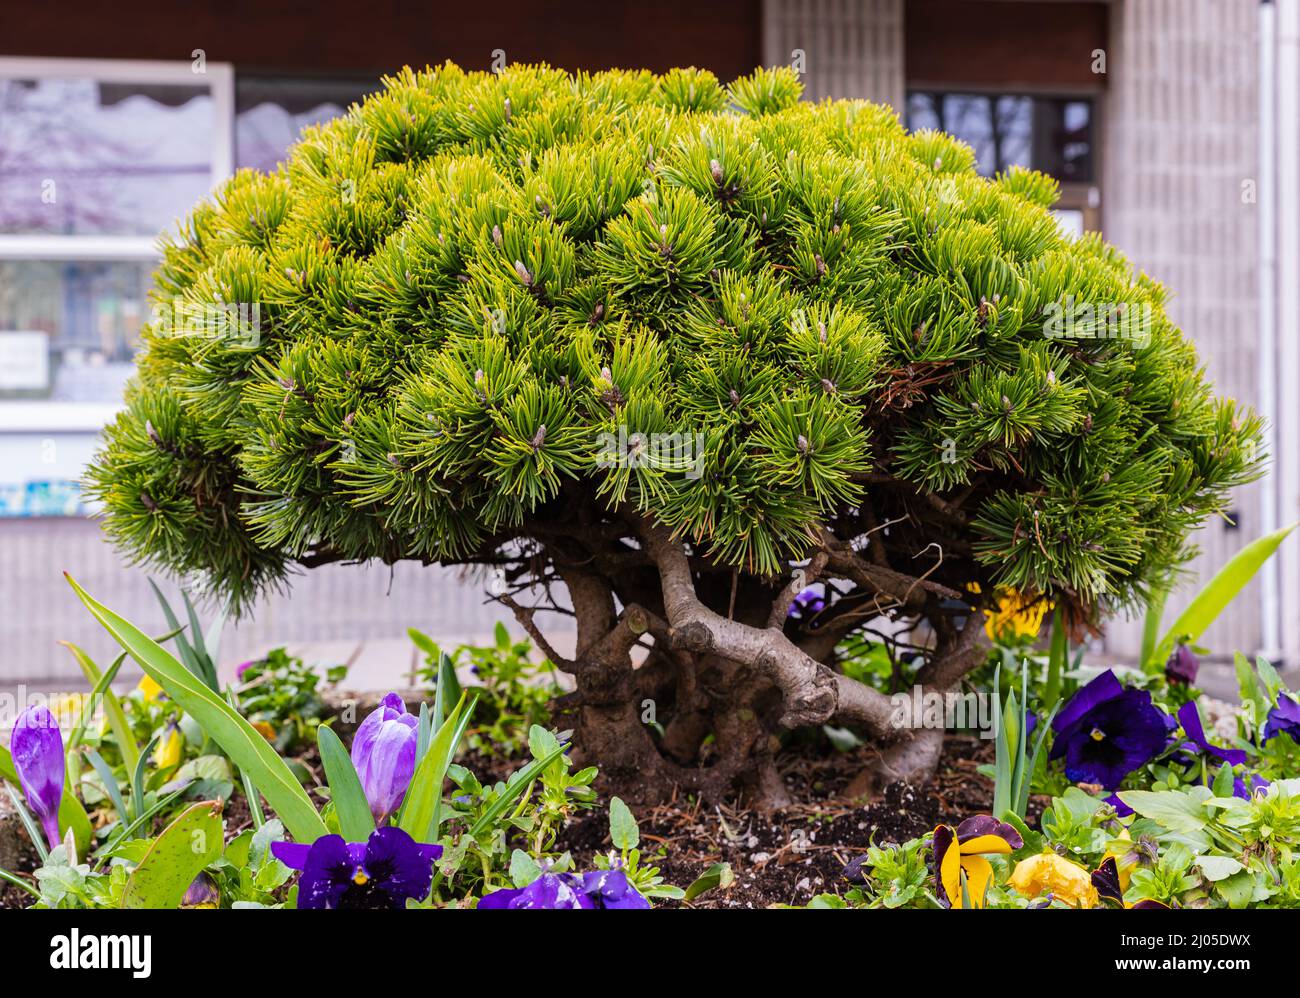 Bonsai pine tree with curved trunk close up in pot Stock Photo